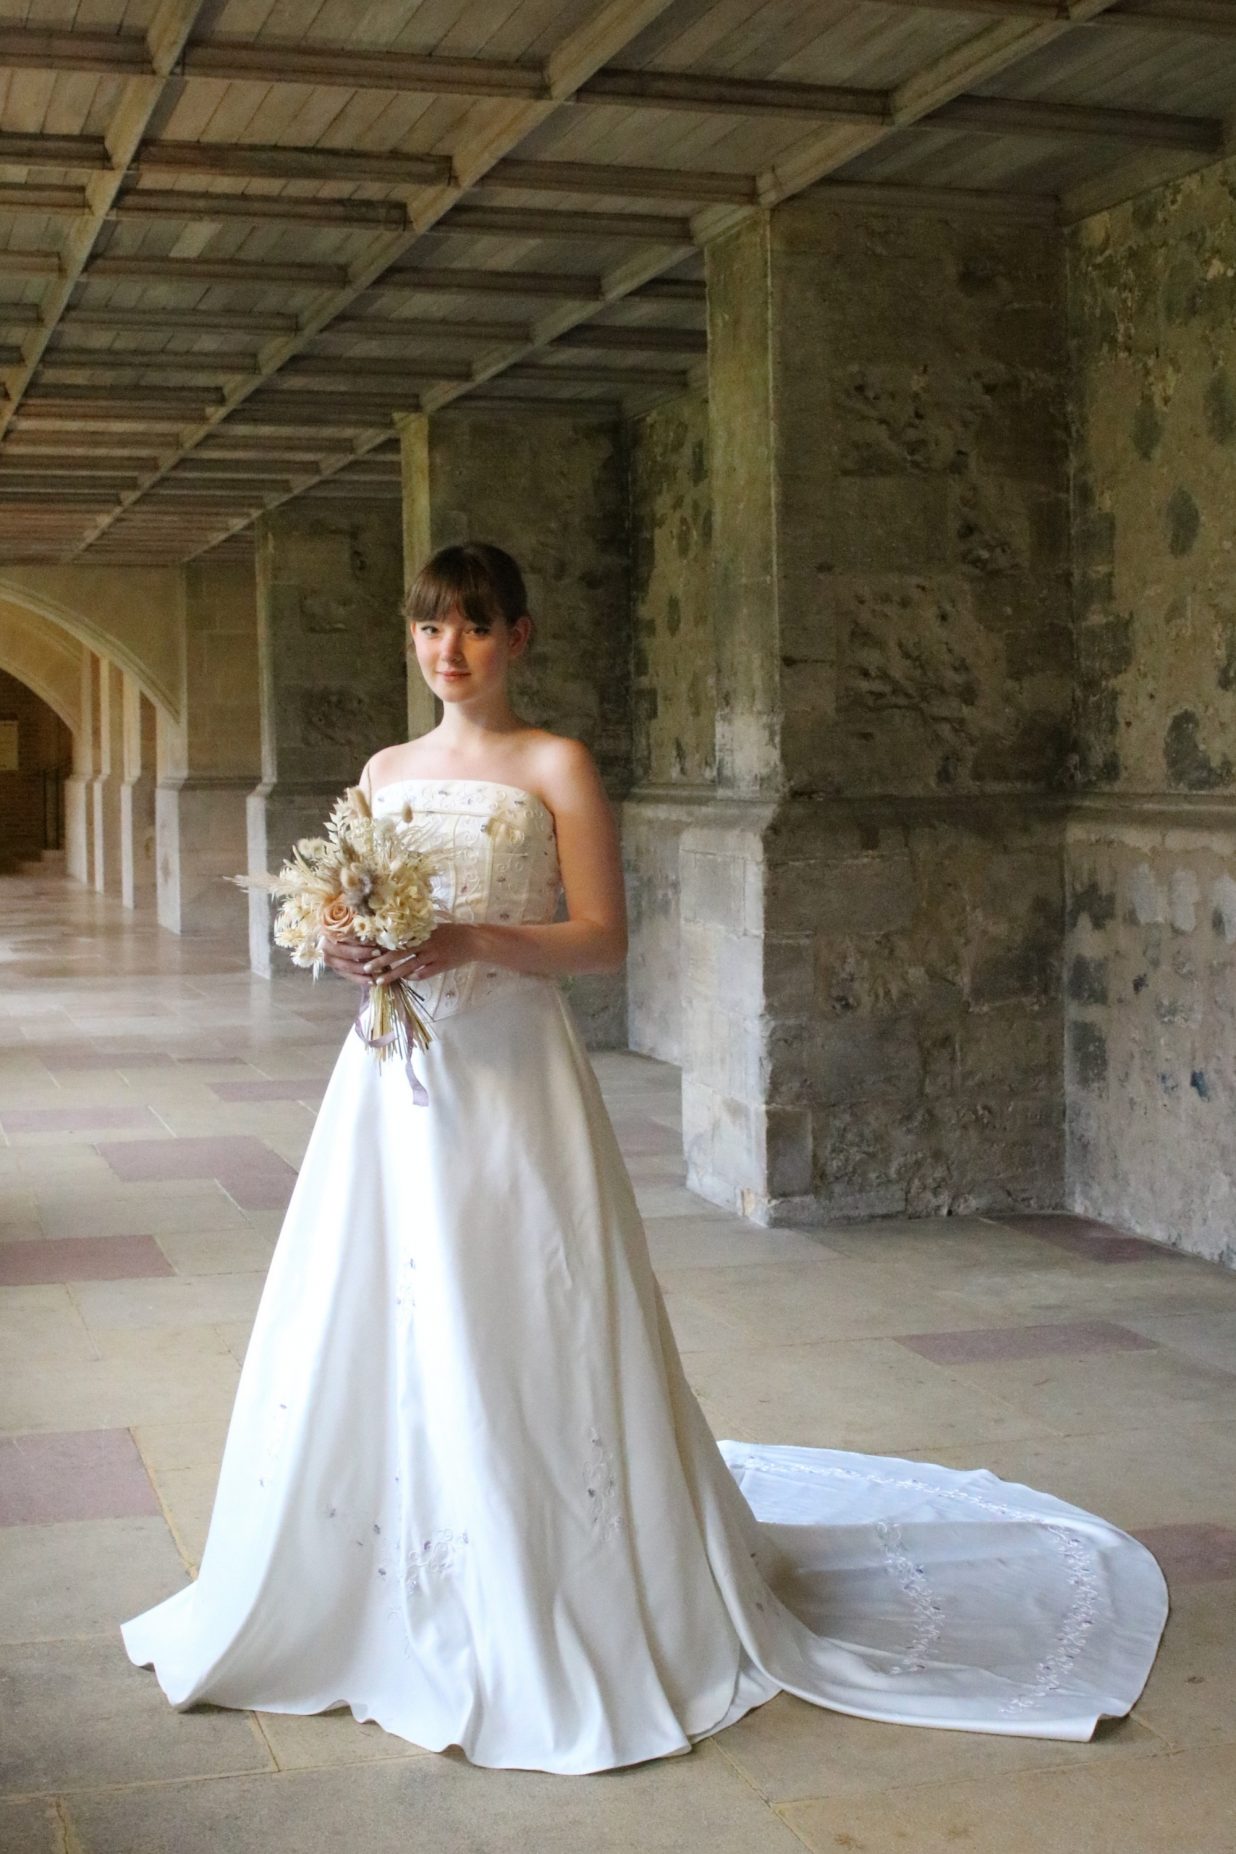 Hospice set to showcase its bridal wear with Cathedral display